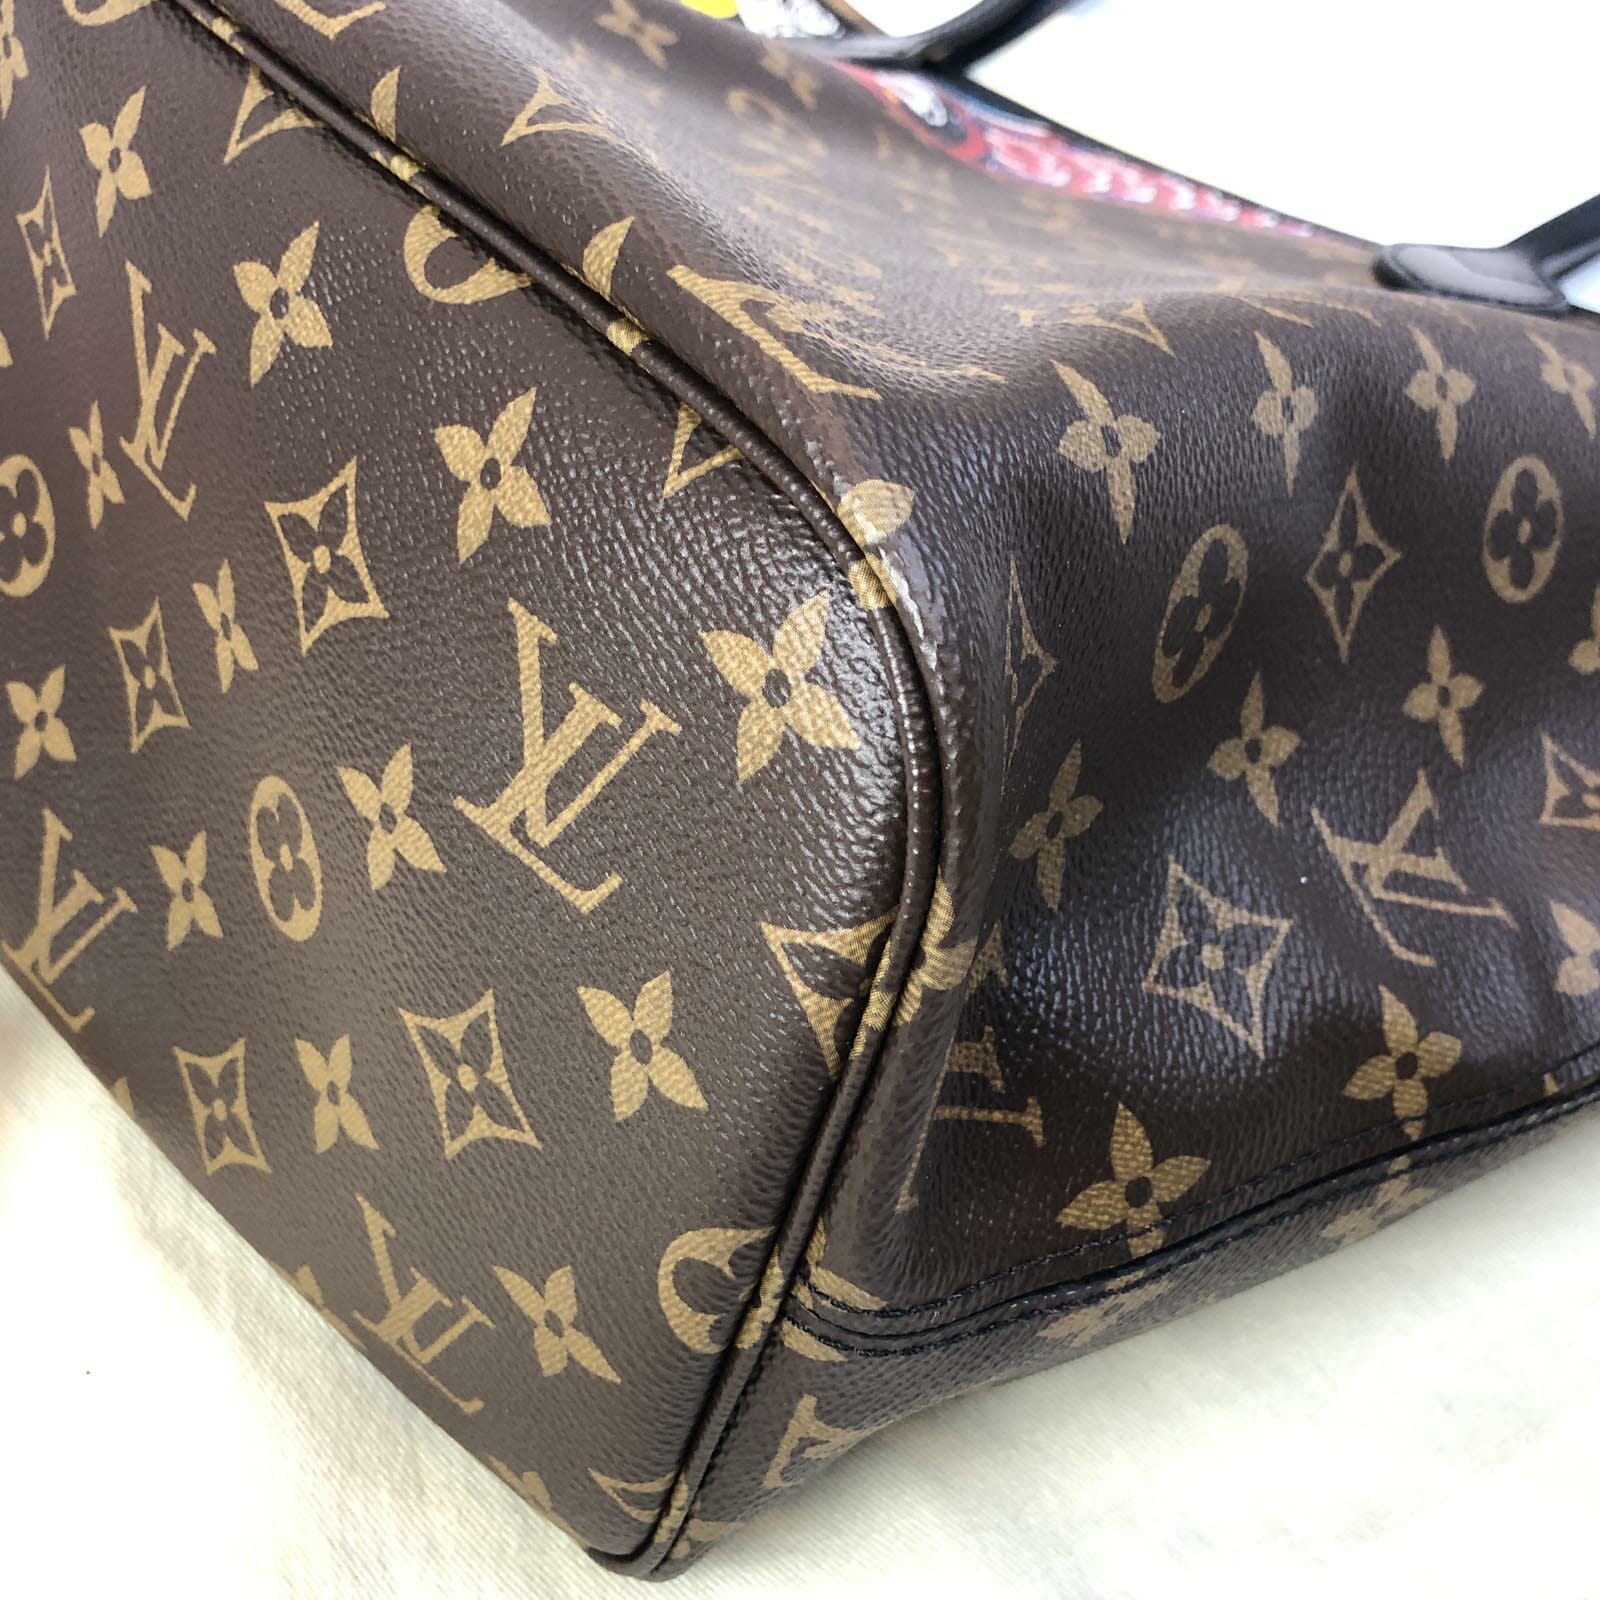 Louis Vuitton Neverfull NM Tote Limited Edition Colored Monogram